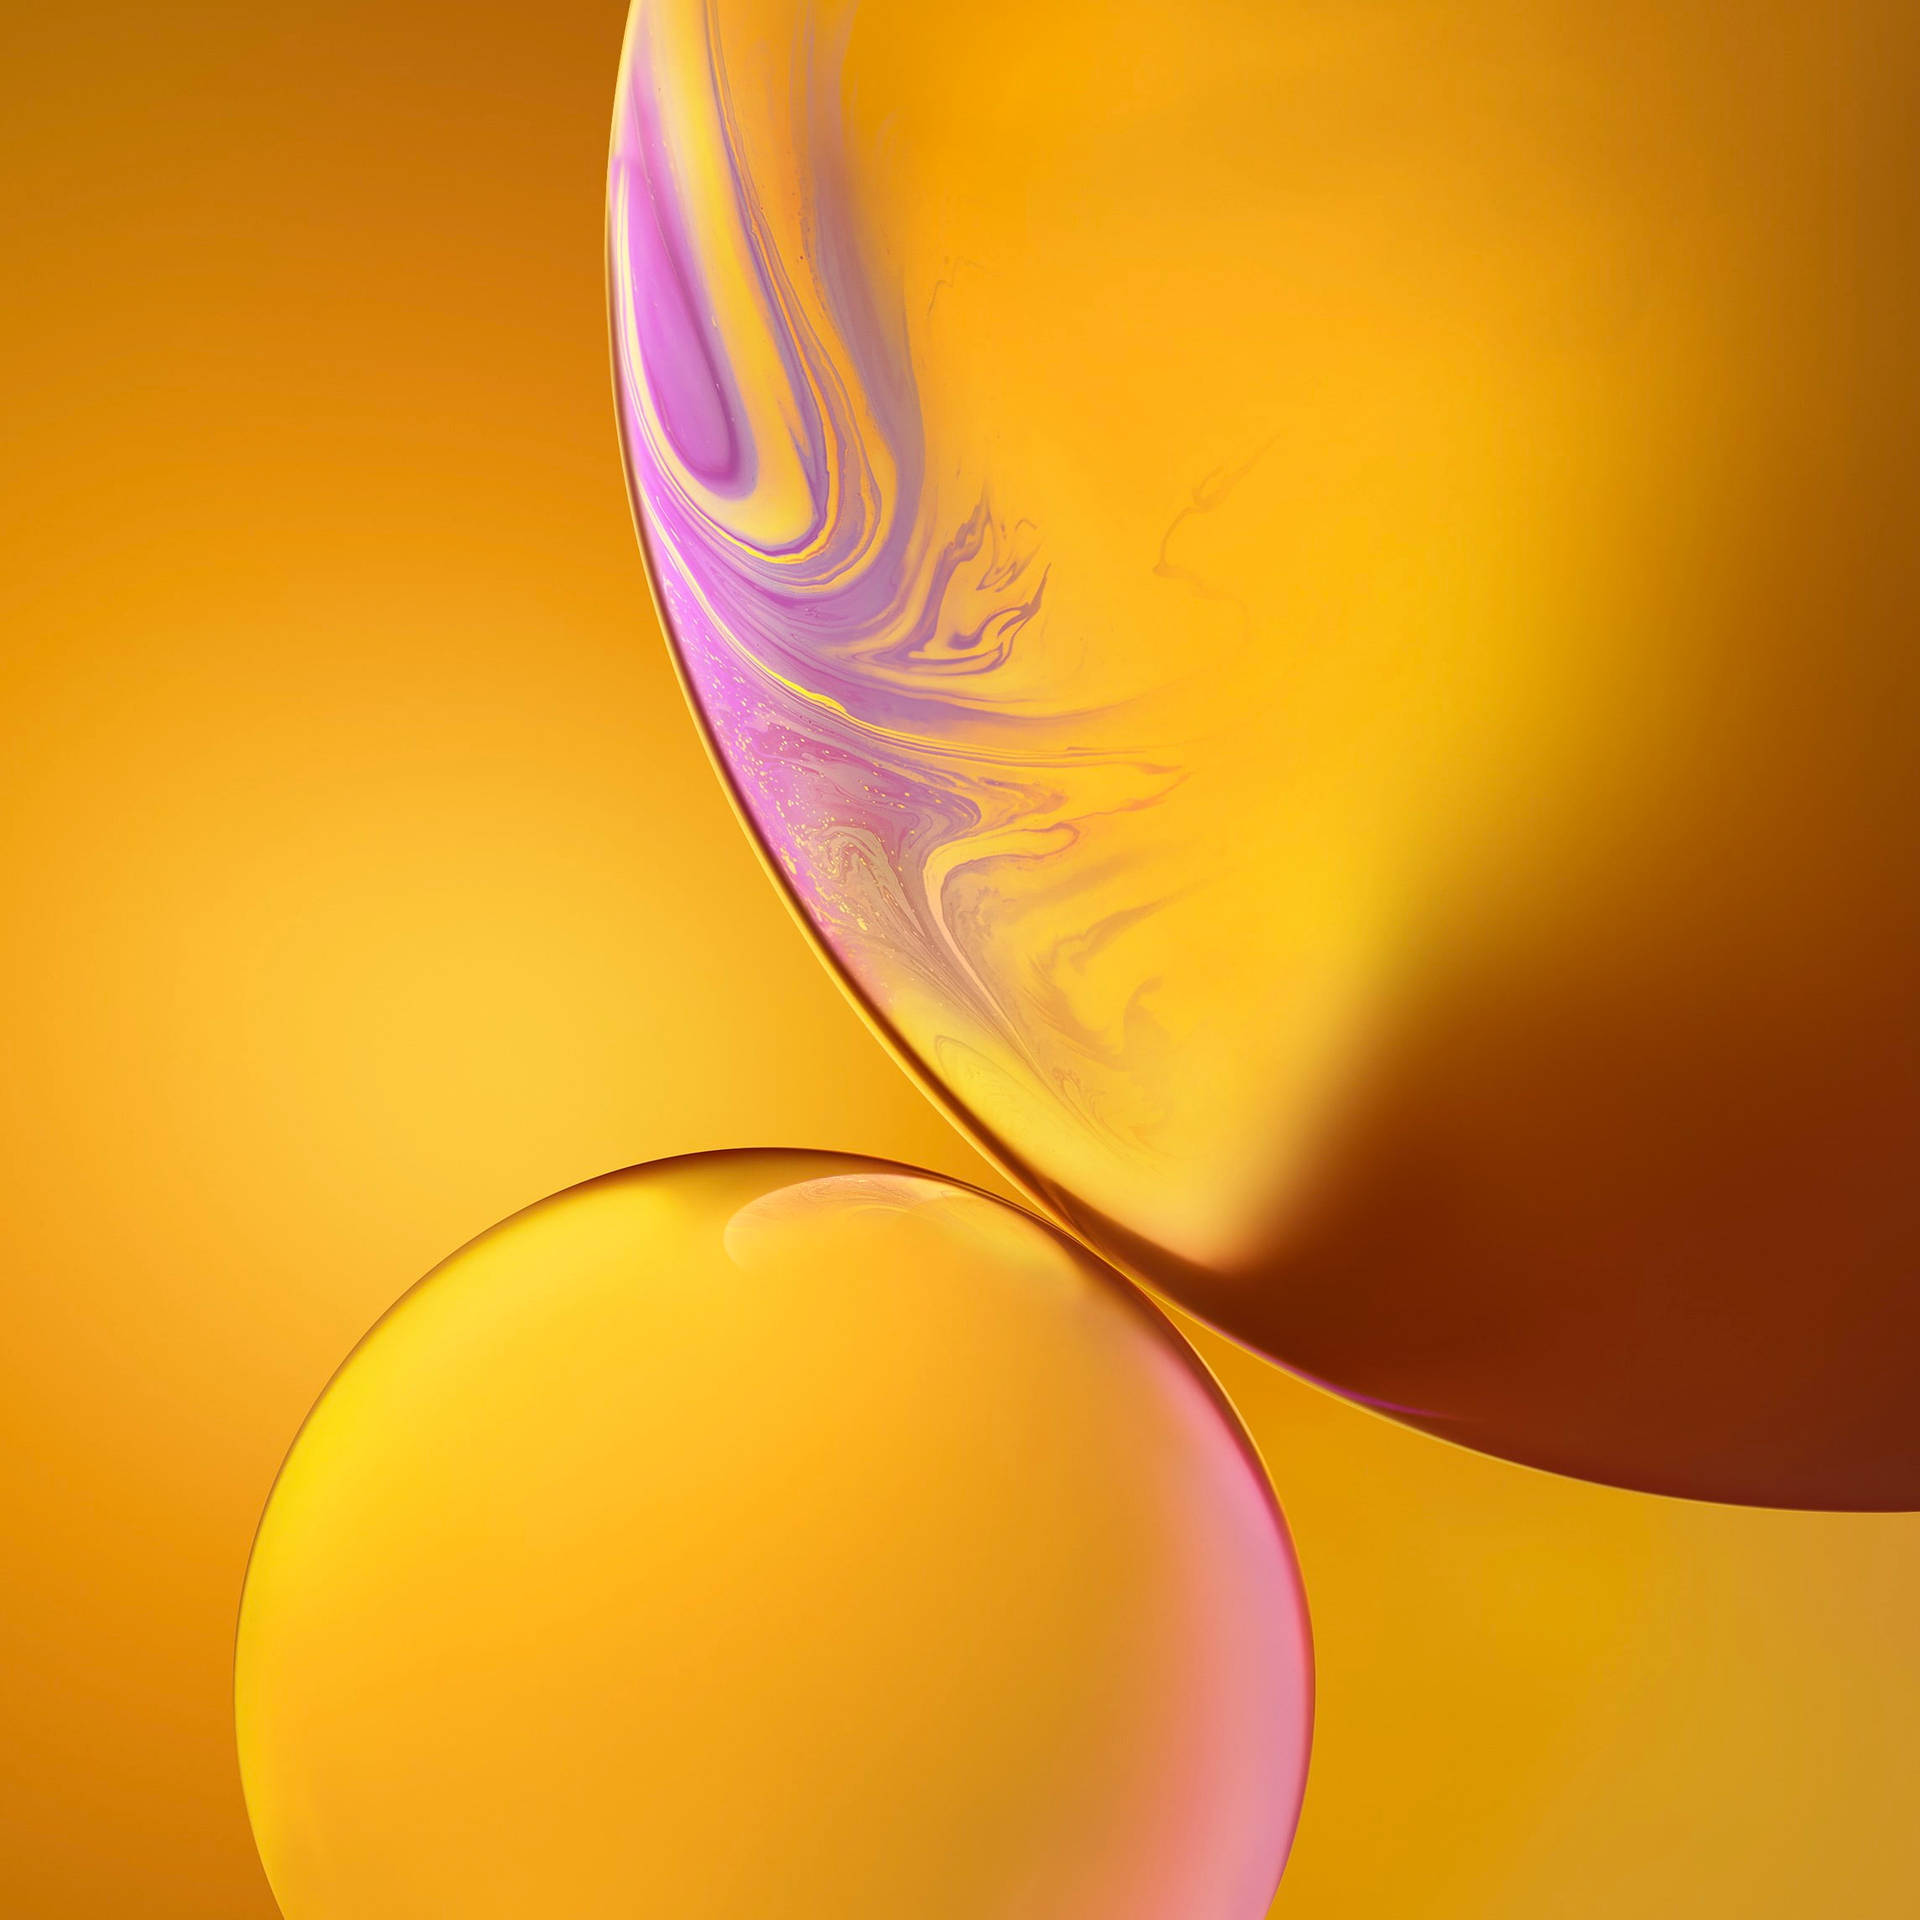 Caption: Stunning Yellow Bubbles Background For Iphone X Amoled Display Background